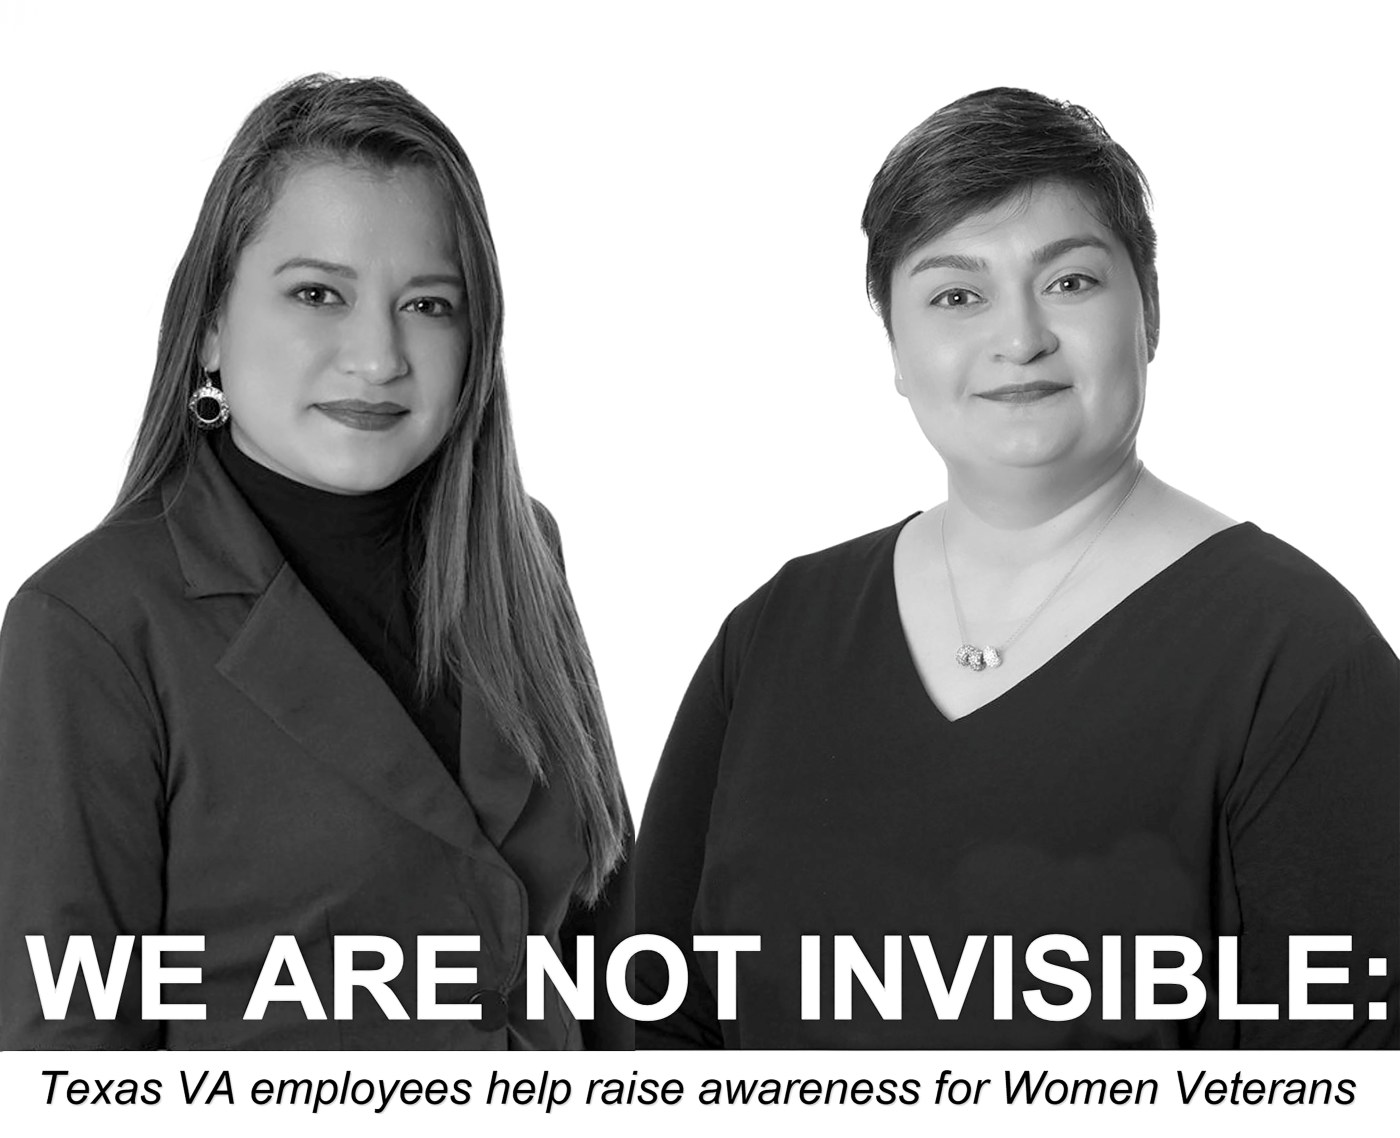 "WE ARE NOT INVISIBLE": Two VA employees, Army Veteran Laura B. Vela and Marine Corps Veteran Lilia A. Garcia, helped raise awareness about Women Veterans concerns and challenges by participating in the "I Am Not Invisible" Project for Texas. (Photo illustration created by Luis H. Loza Gutierrez featuring black and white portraits by VA photographer Eugene Russell)